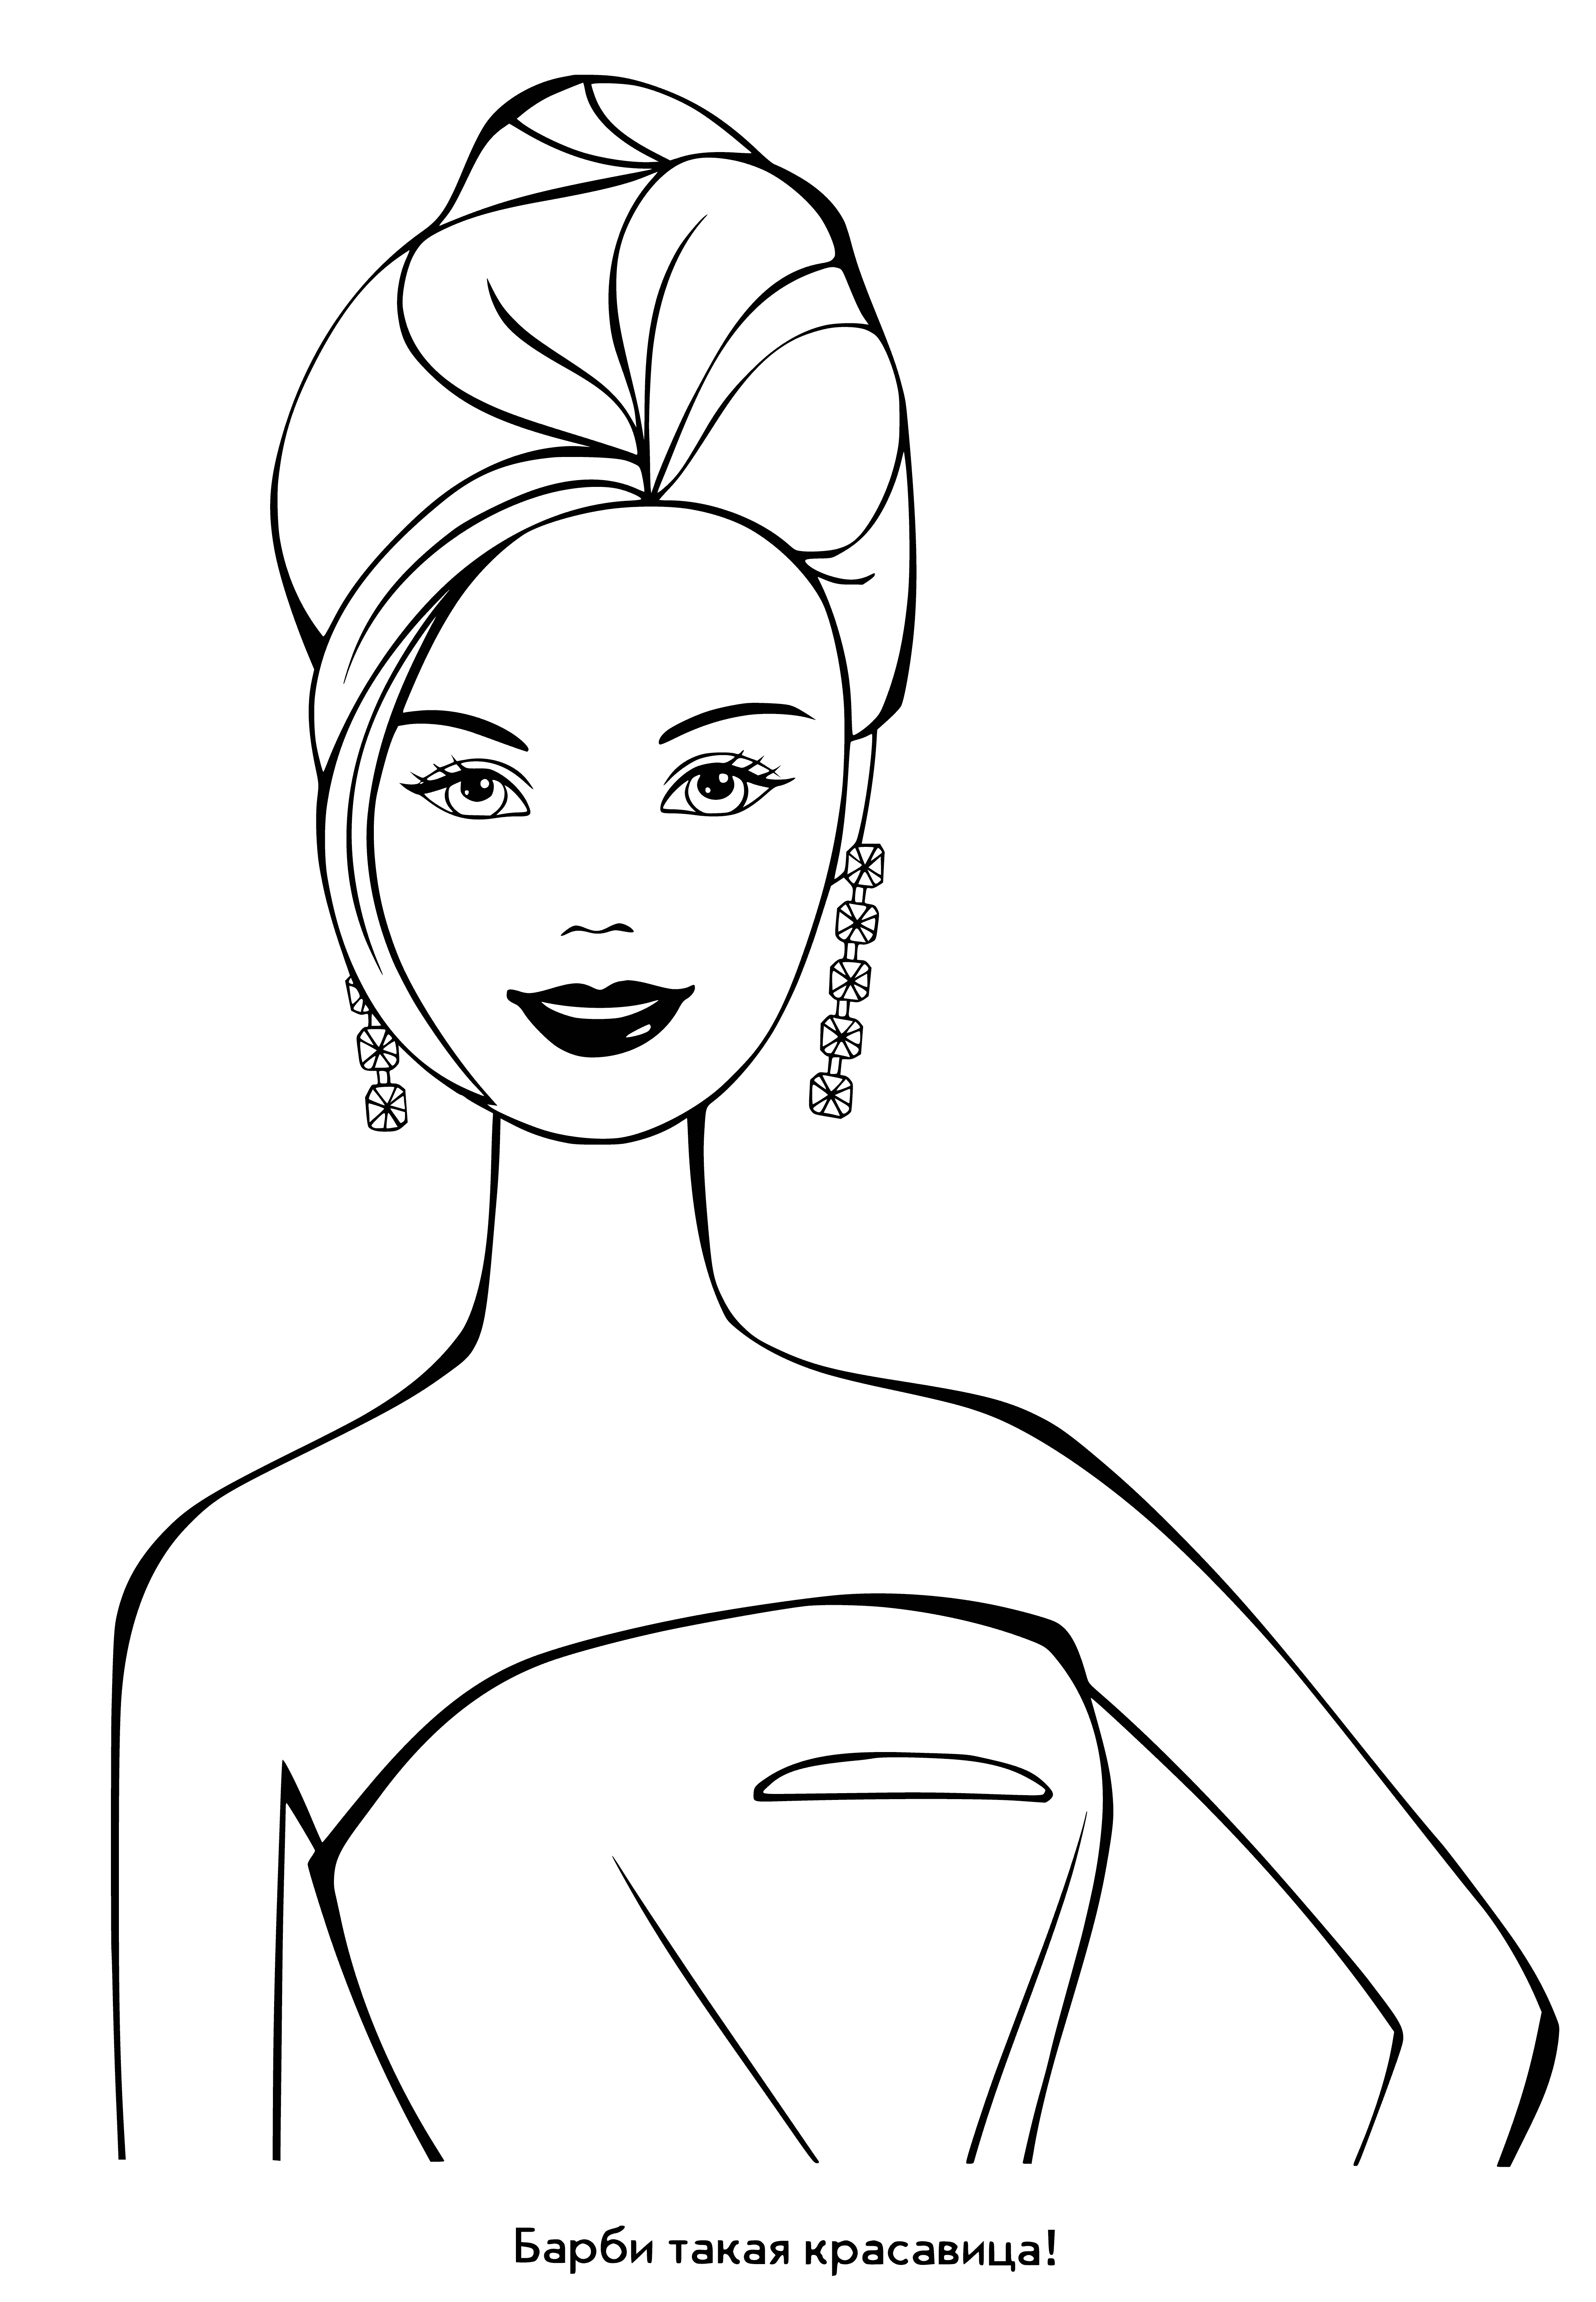 coloring page: Barbie has blonde hair and blue eyes. She's wearing pink, white, pearls, and hoops. High heels, too! #BarbieLife